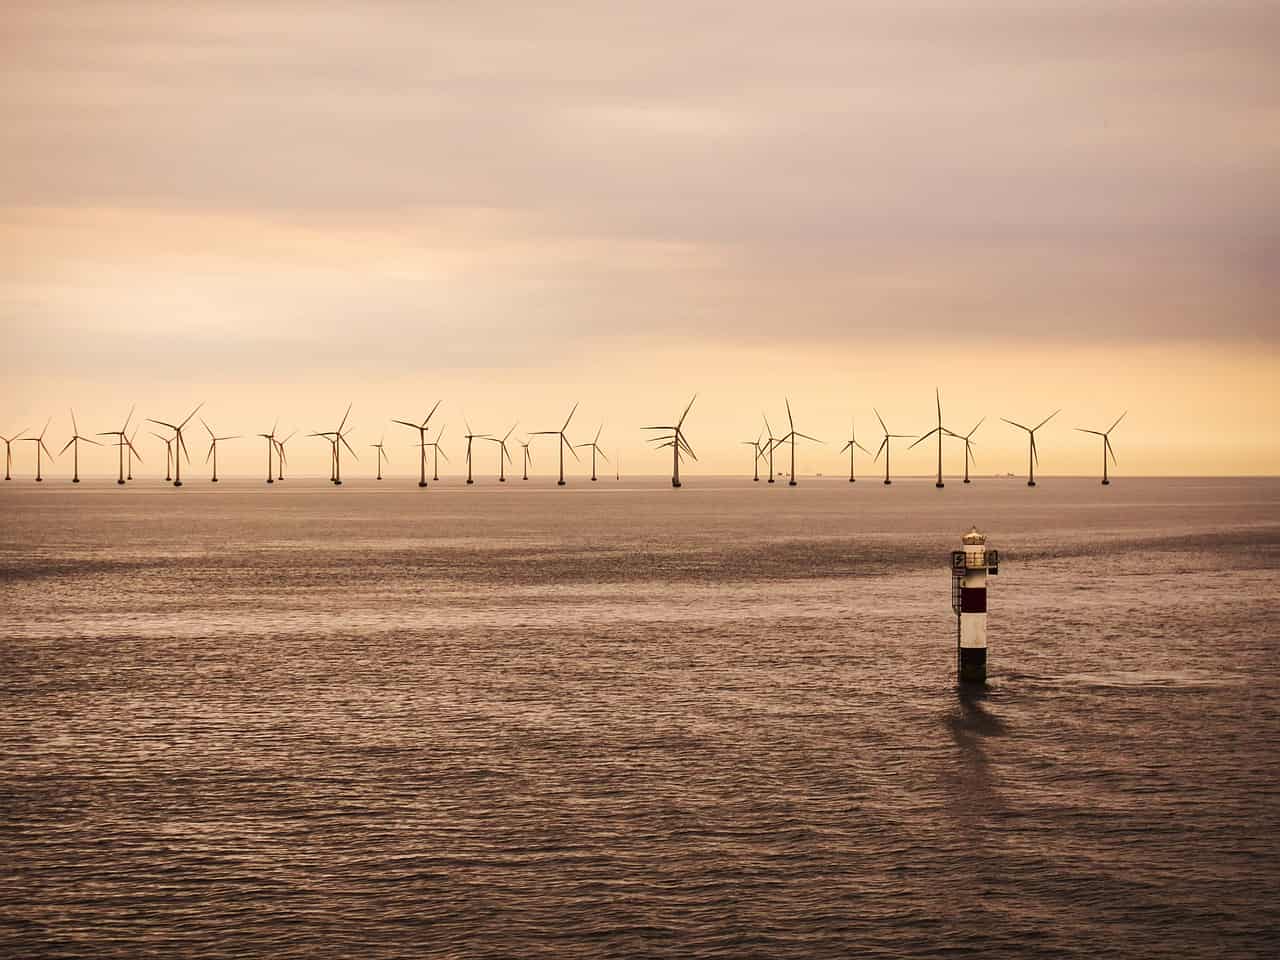 Project aims to ensure offshore renewable innovations remain cyber-secure